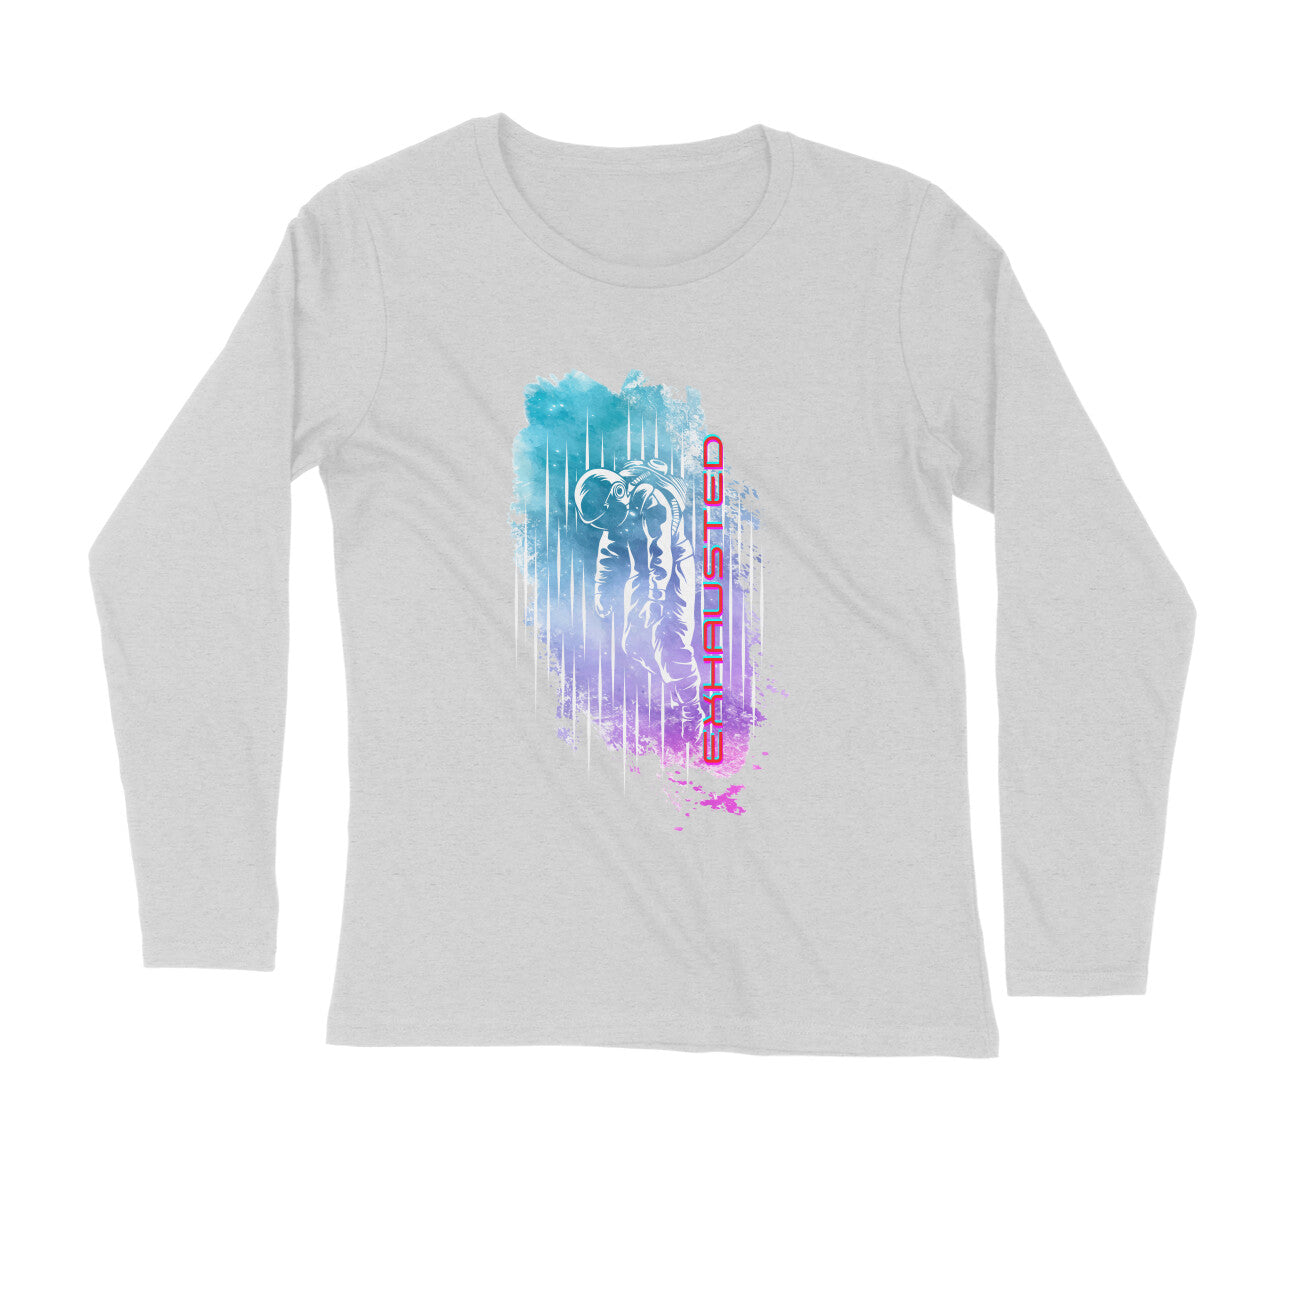 Space Art Exhausted Printed Full Sleeves T-Shirt